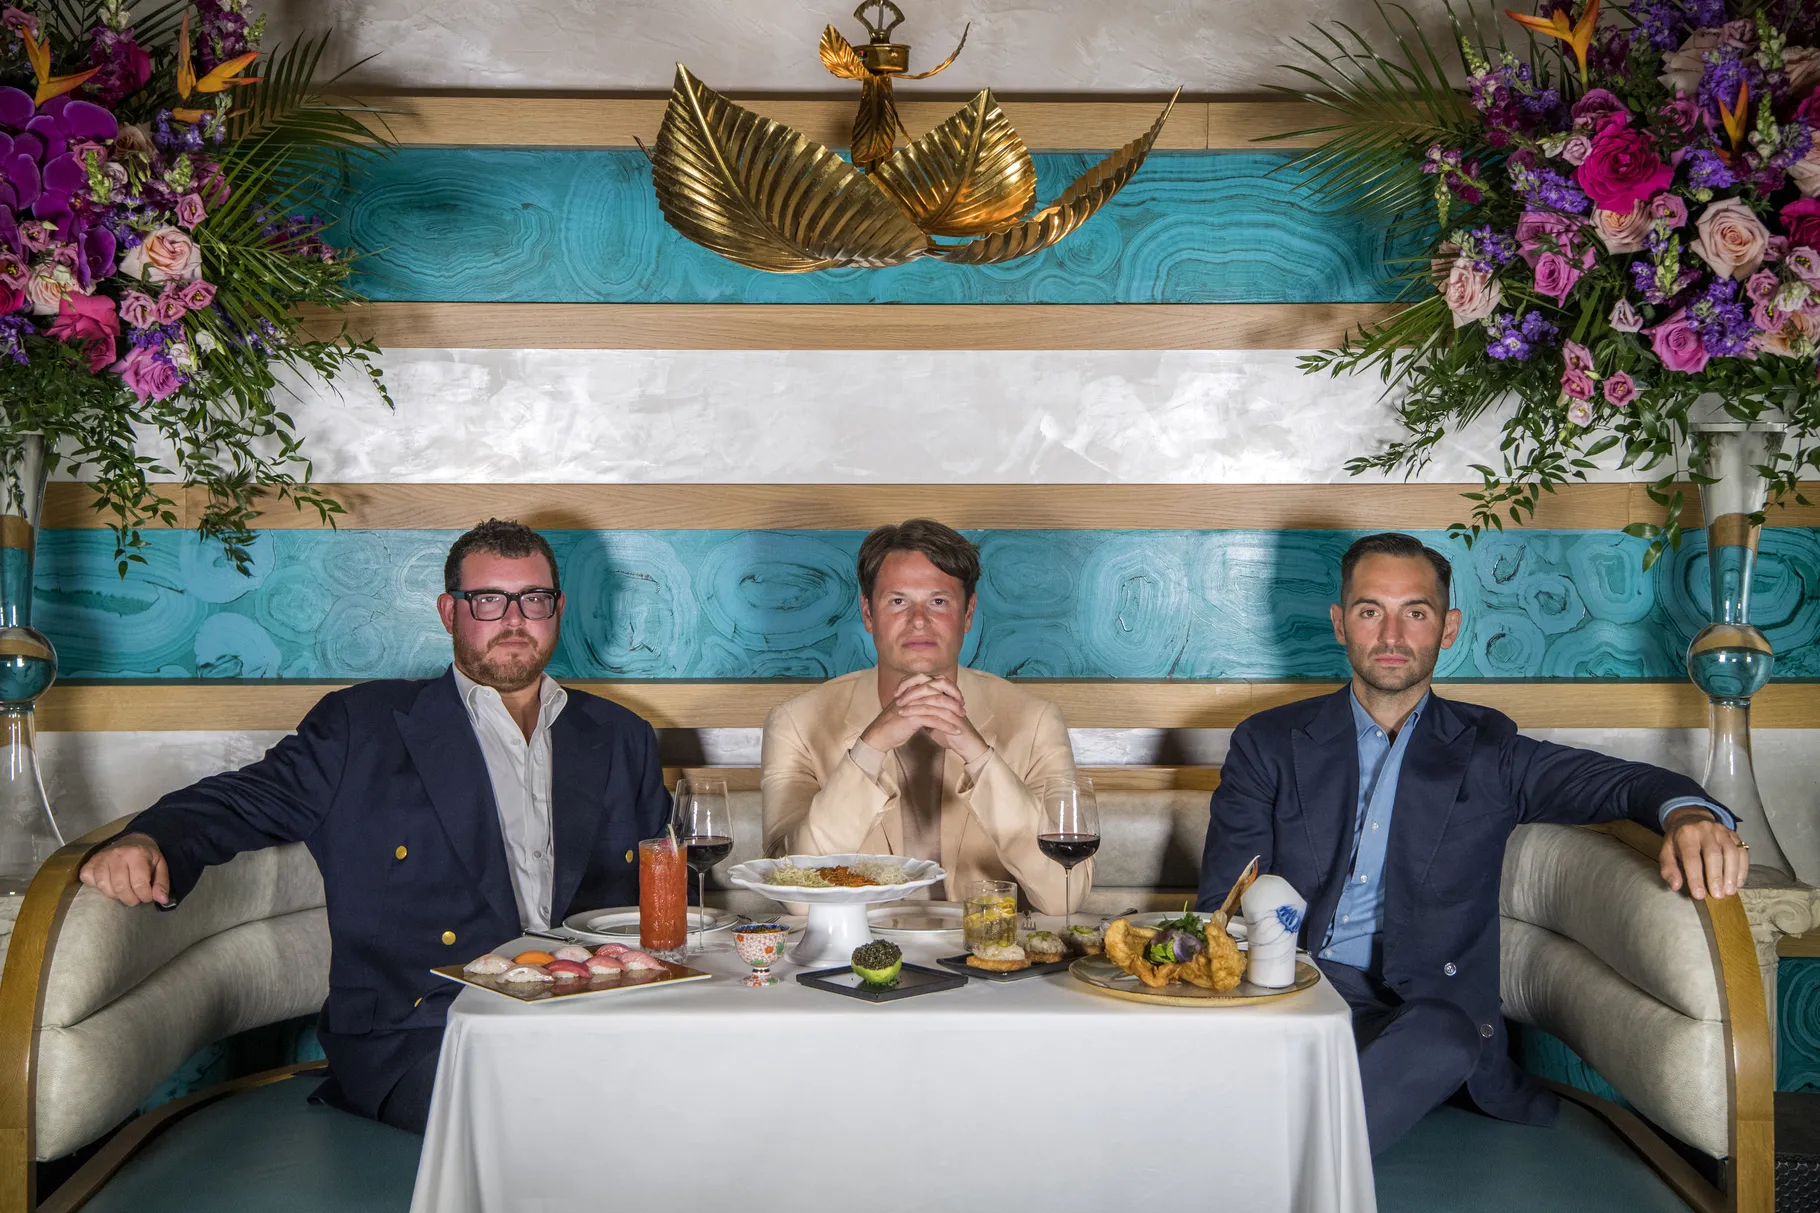 Jeff Zalaznick, Rich Torrisi, Mario Carbone of Major Food Group pose for a photograph in a colorful banquette.